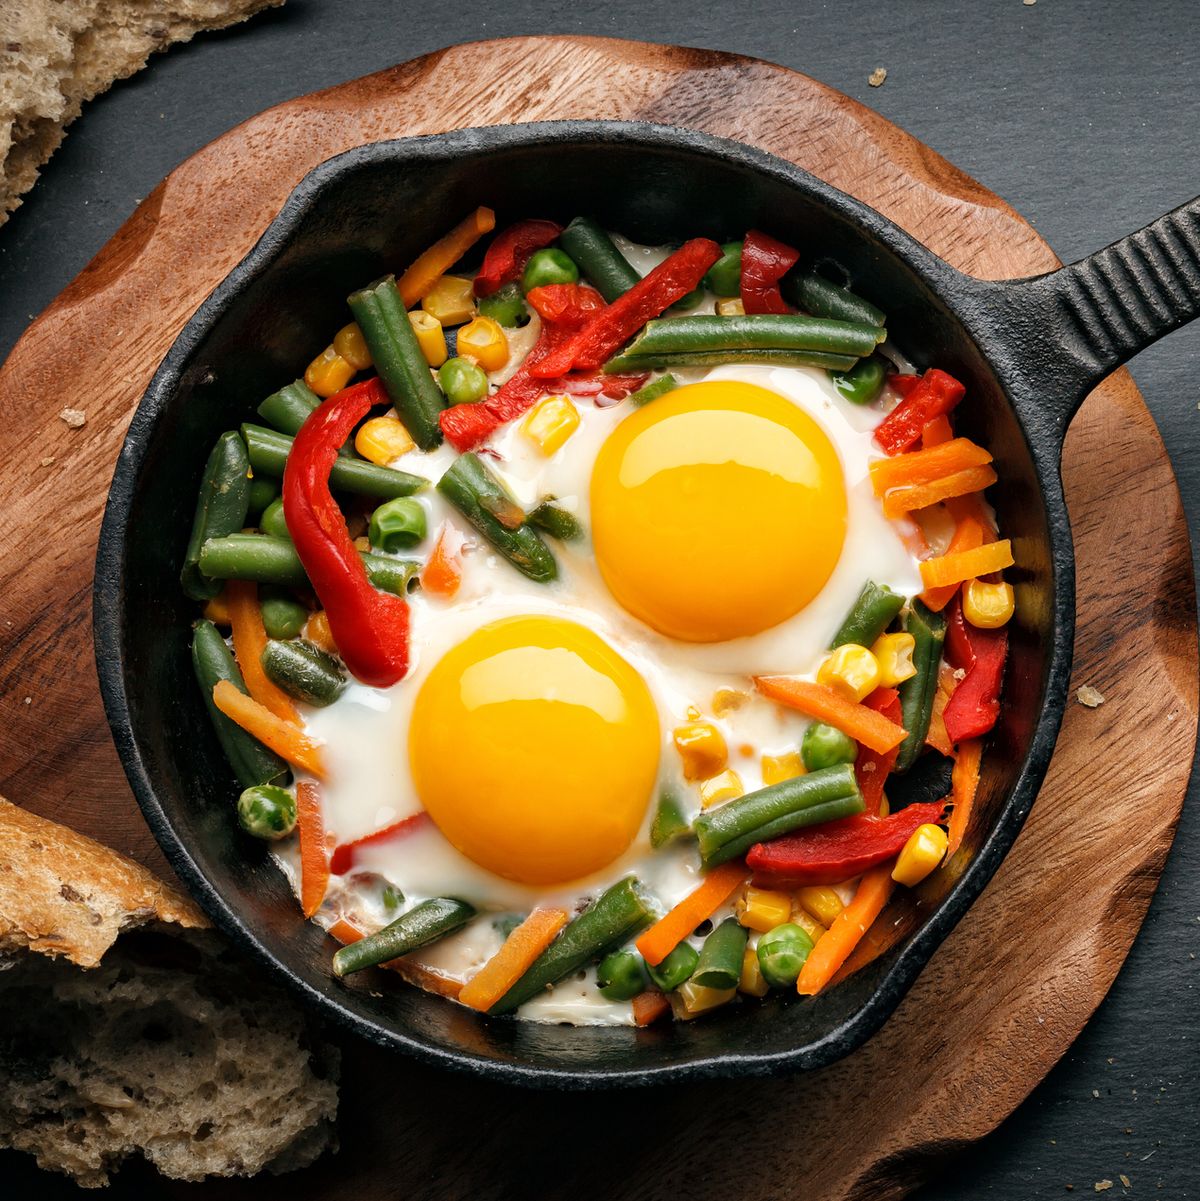 https://hips.hearstapps.com/hmg-prod/images/fried-eggs-in-a-cast-iron-royalty-free-image-1606260387.?crop=0.599xw:0.899xh;0.0721xw,0.0817xh&resize=1200:*